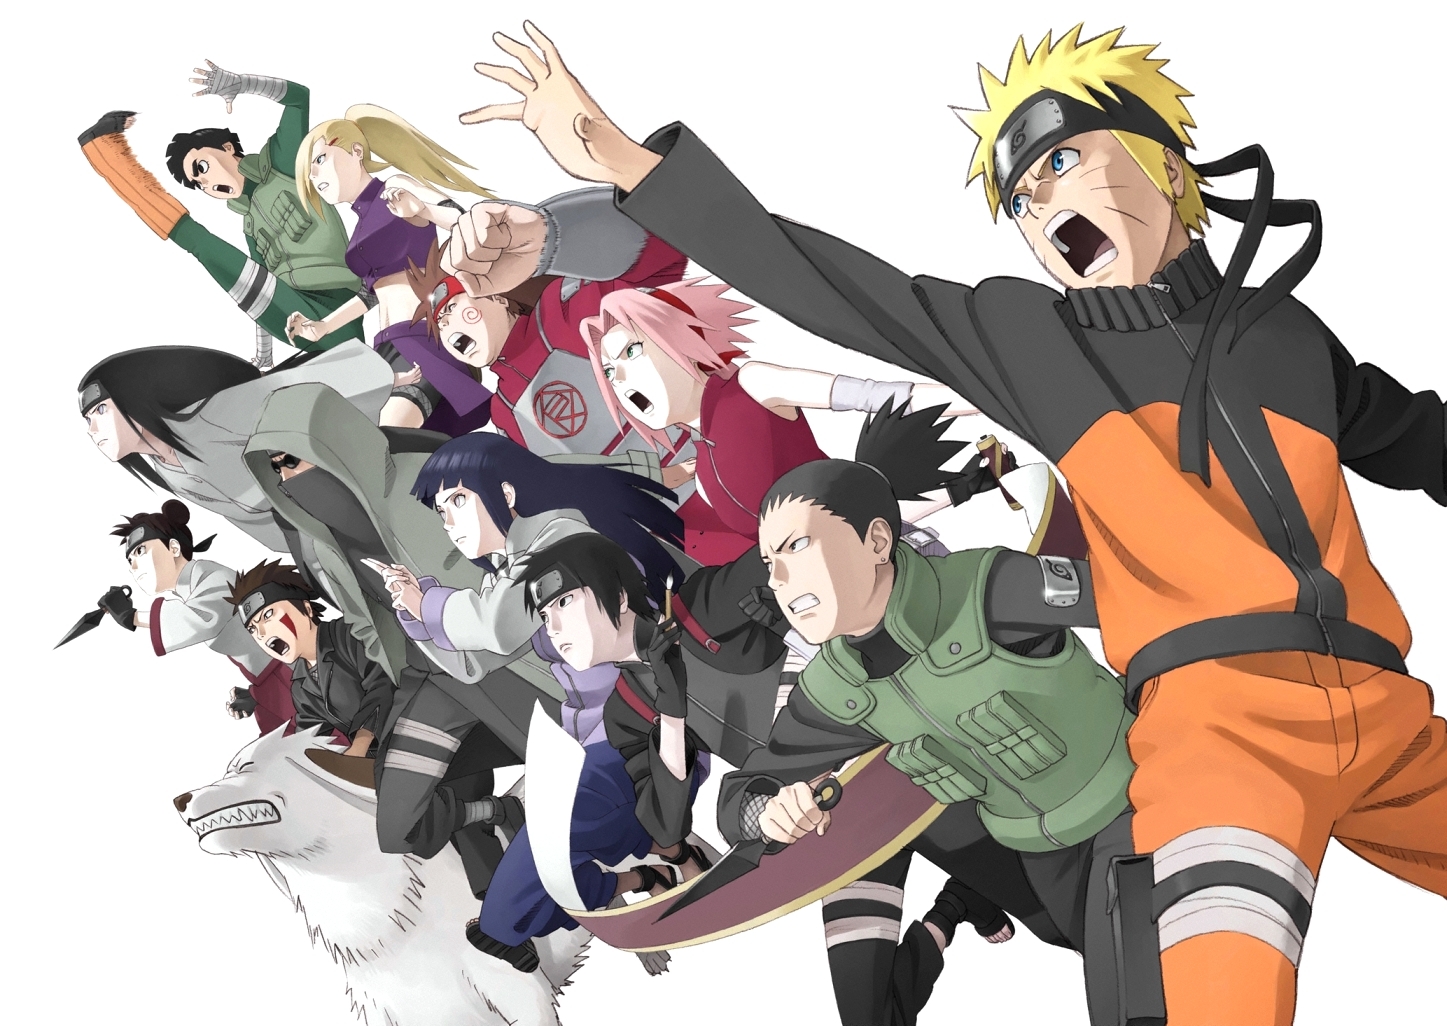 http://images2.fanpop.com/images/photos/8400000/Naruto-Shippuuden-Movie-3-Inheritors-of-the-Will-of-Fire-naruto-shippuuden-8433004-1447-1026.jpg